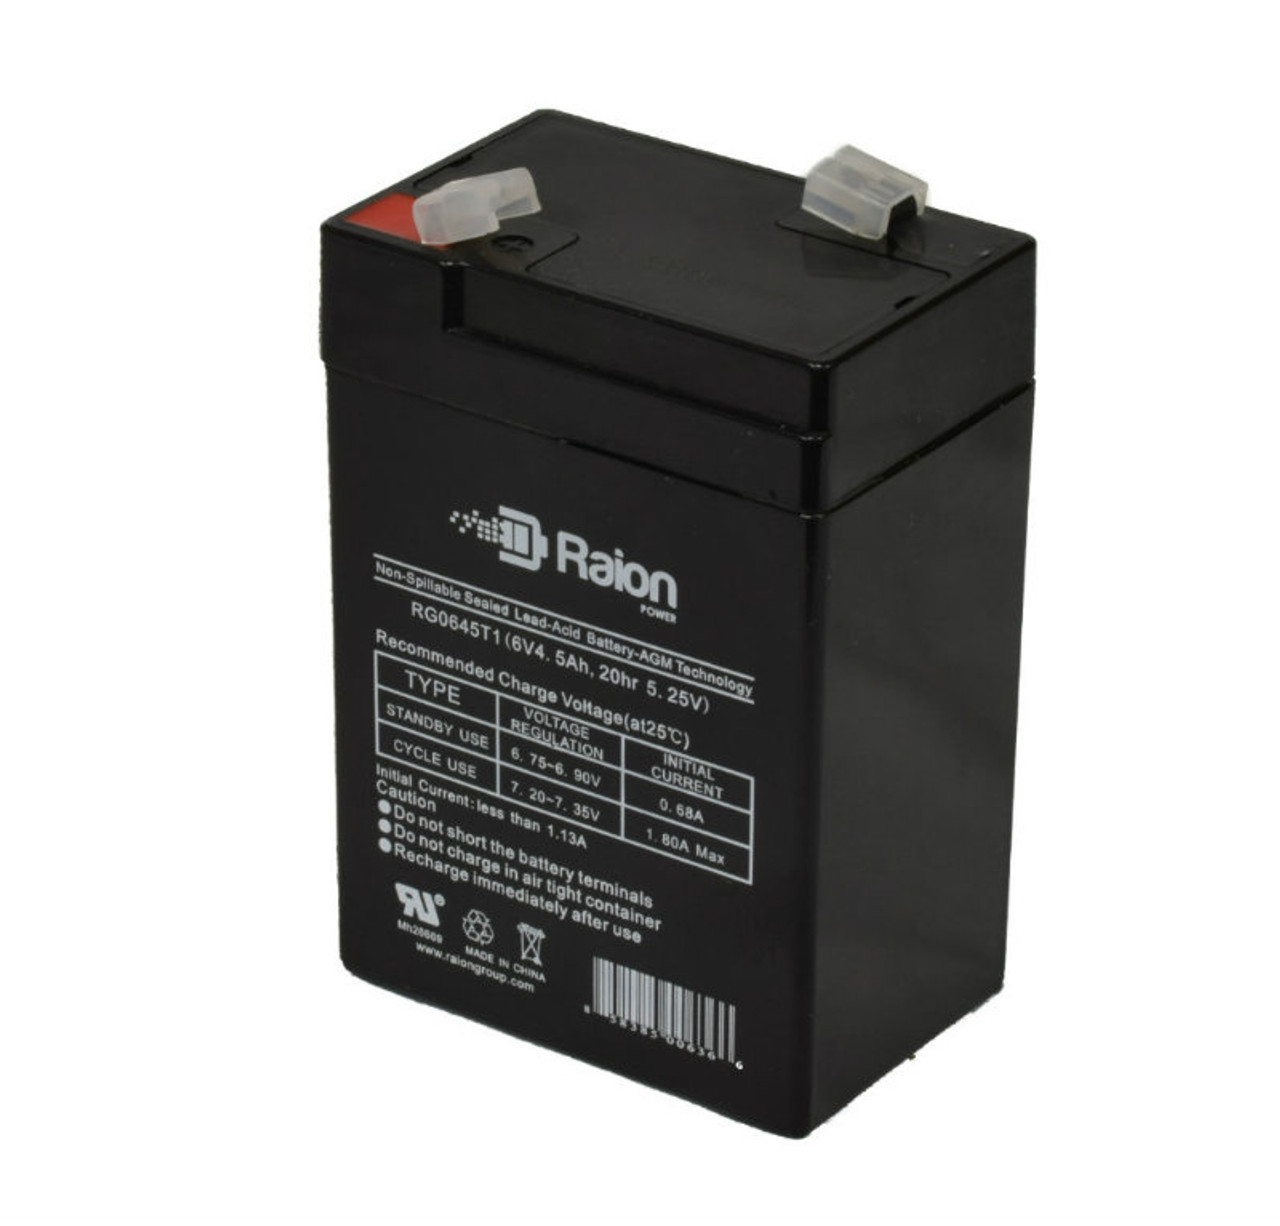 Raion Power RG0645T1 6V 4.5Ah Replacement Battery Cartridge for Light Alarms KB13CP